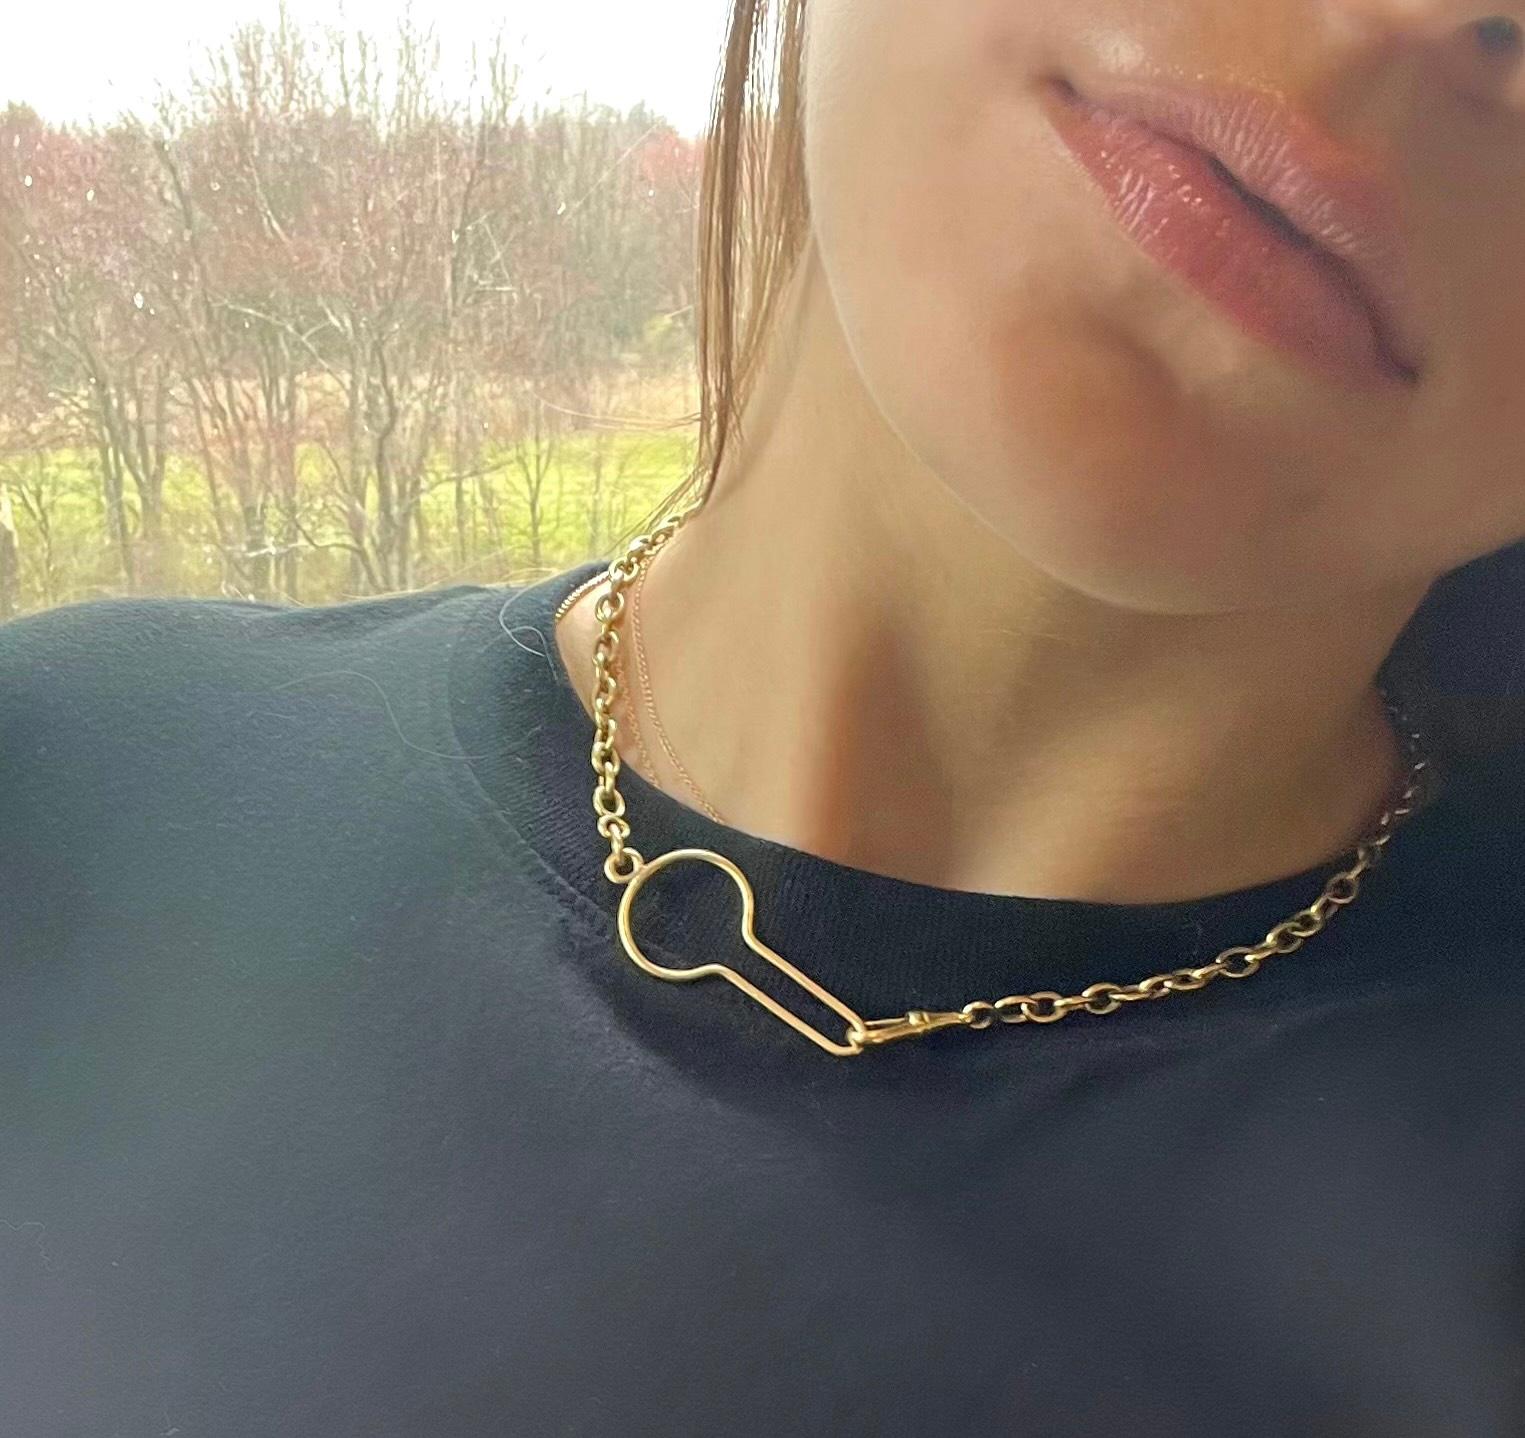 Antique 18 Karat Yellow Gold Watch Chain Dog-Clasp Stackable Choker Necklace In Good Condition For Sale In Fairfield, CT